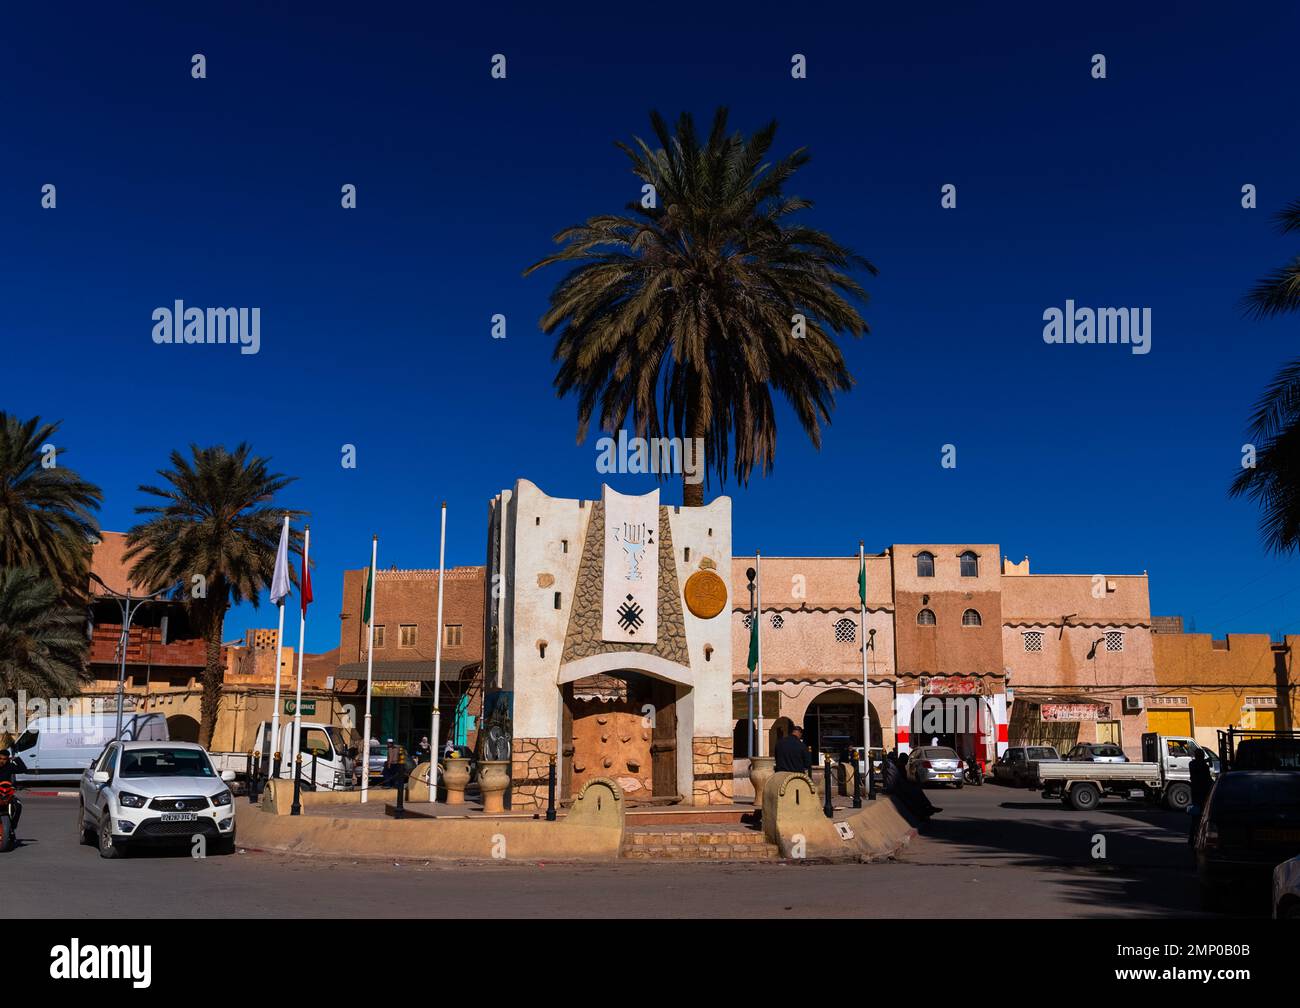 Roundabout in a square, North Africa, Ghardaia, Algeria Stock Photo